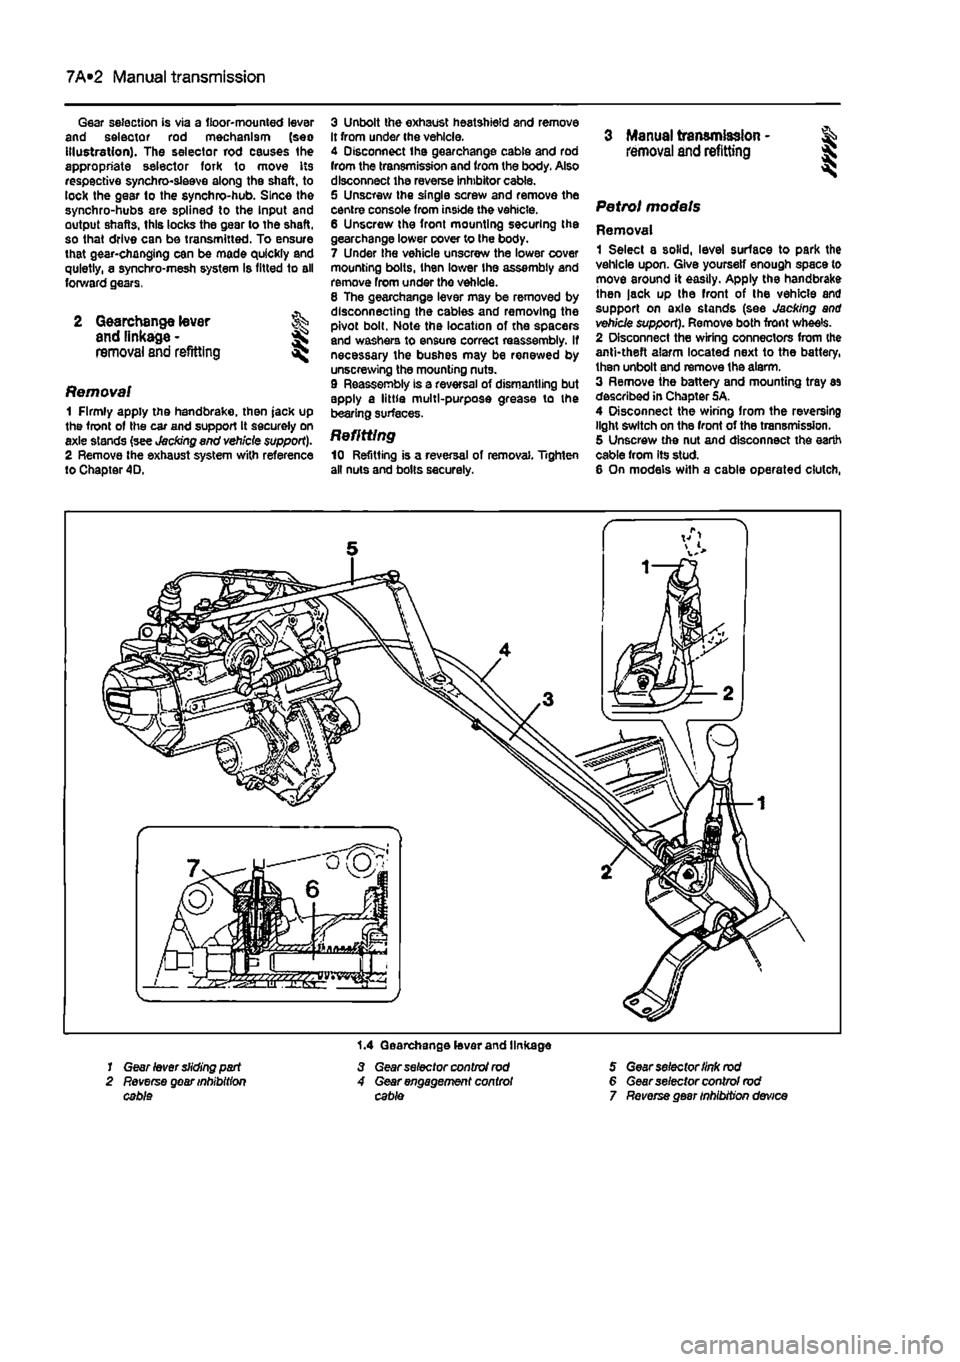 FIAT PUNTO 1996 176 / 1.G Workshop Manual 
7A*2 Manual transmission 
Gear selection is via a floor-mounted lever and selector rod mechanism (seo Illustration). The selector rod causes the appropriate selector fork to move its respective synch